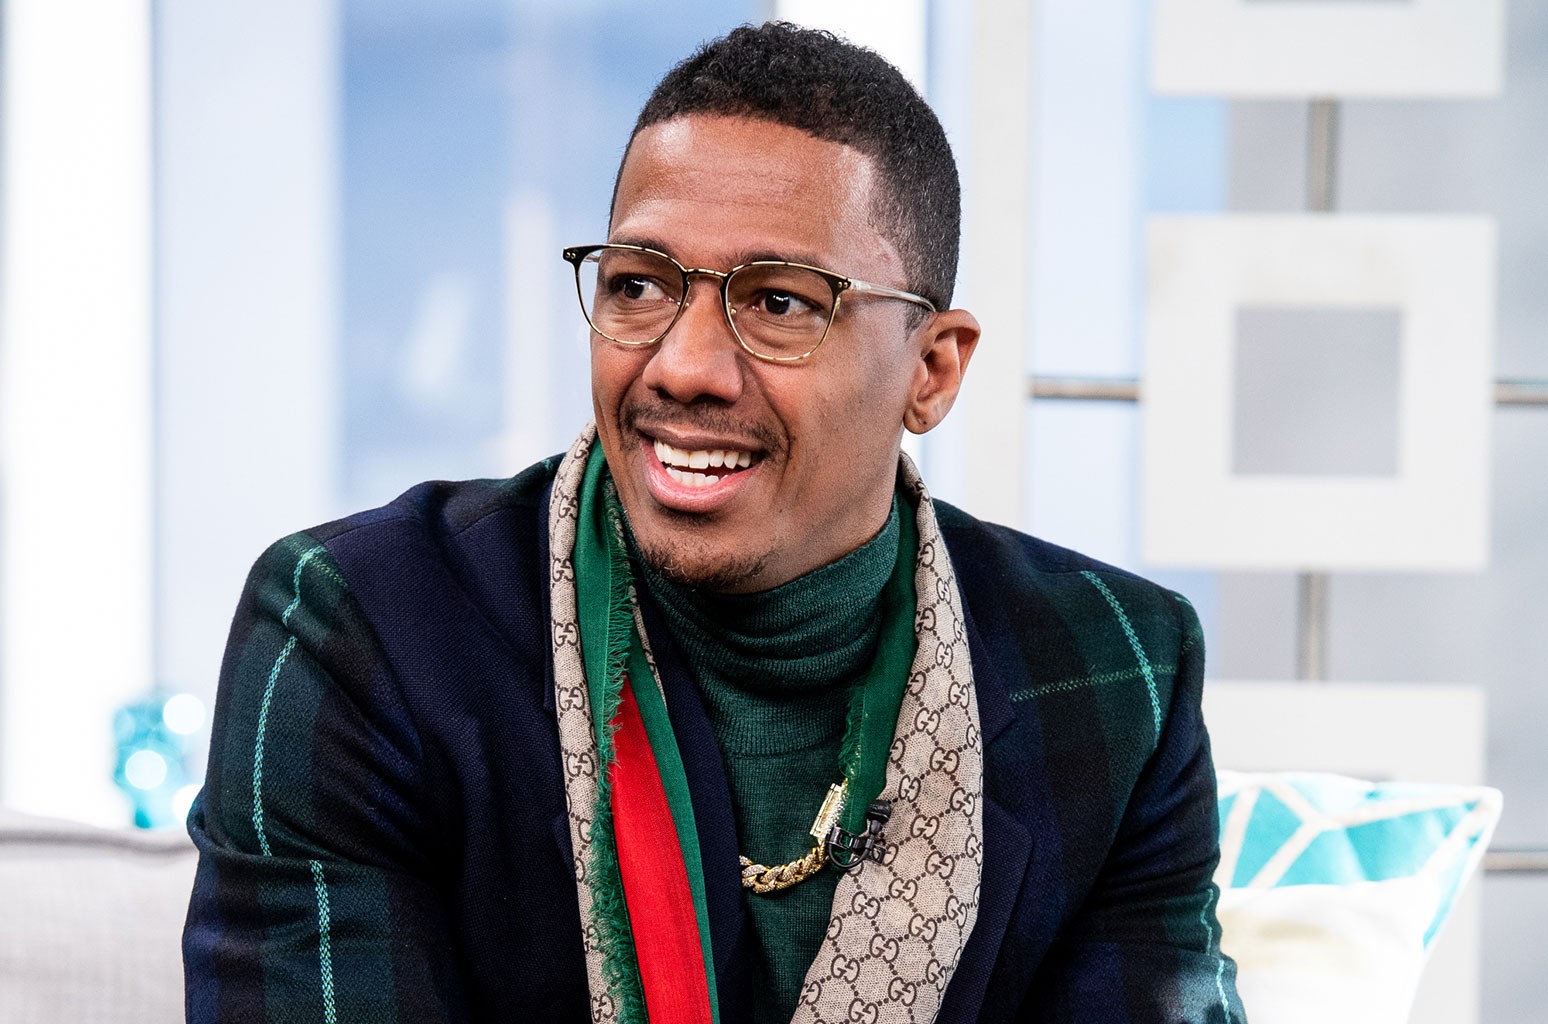 Nick cannon